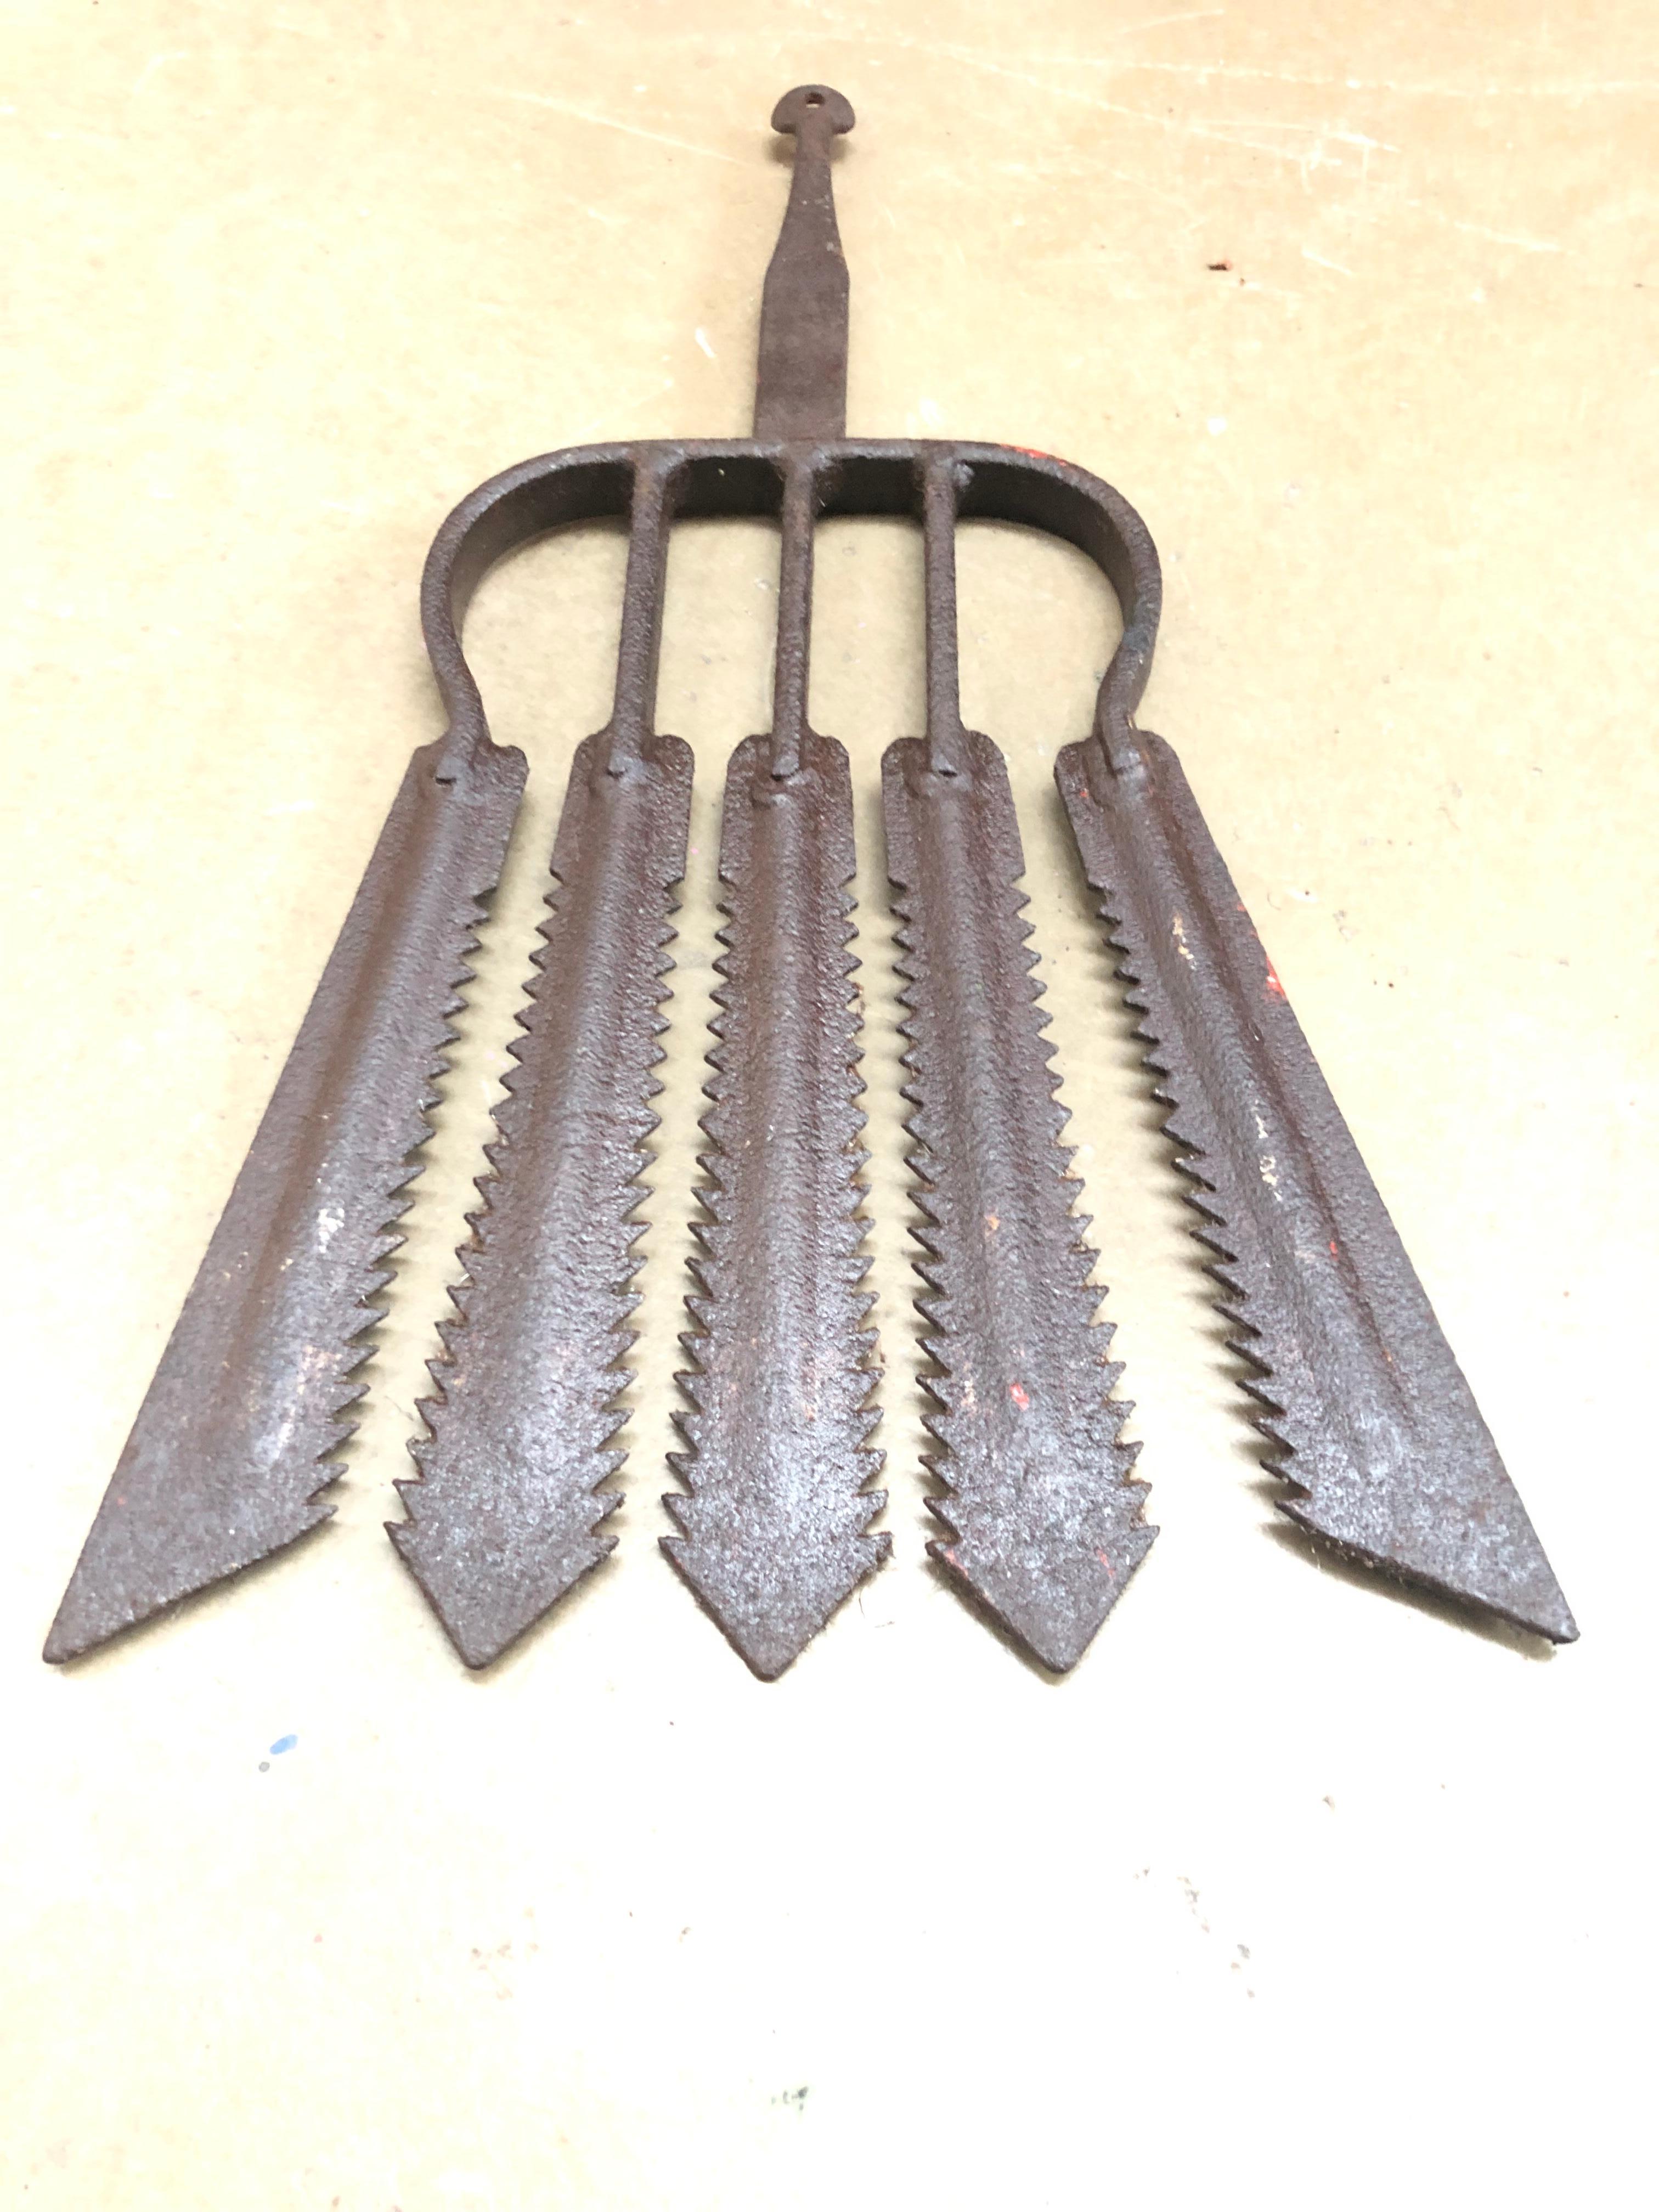 Collection of 3 Antique Wrought Iron Eel Forks 2